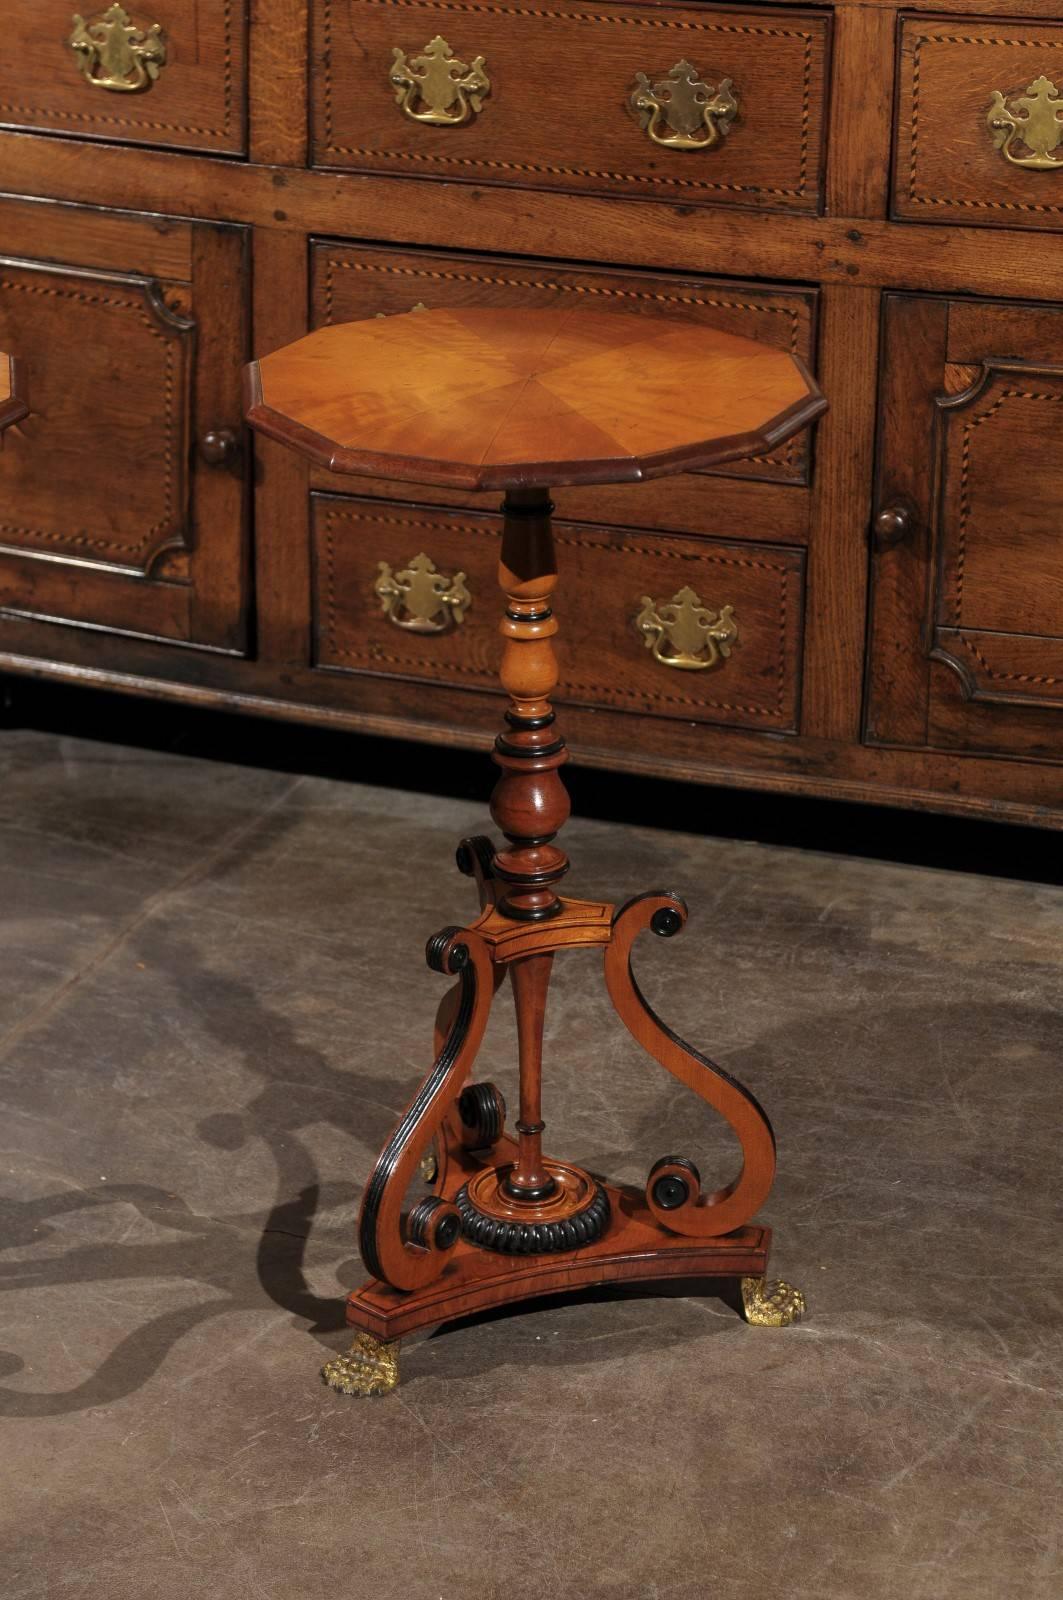 19th Century Pair of 1820s English Period Regency Parcel-ebonized Side Tables with Volutes